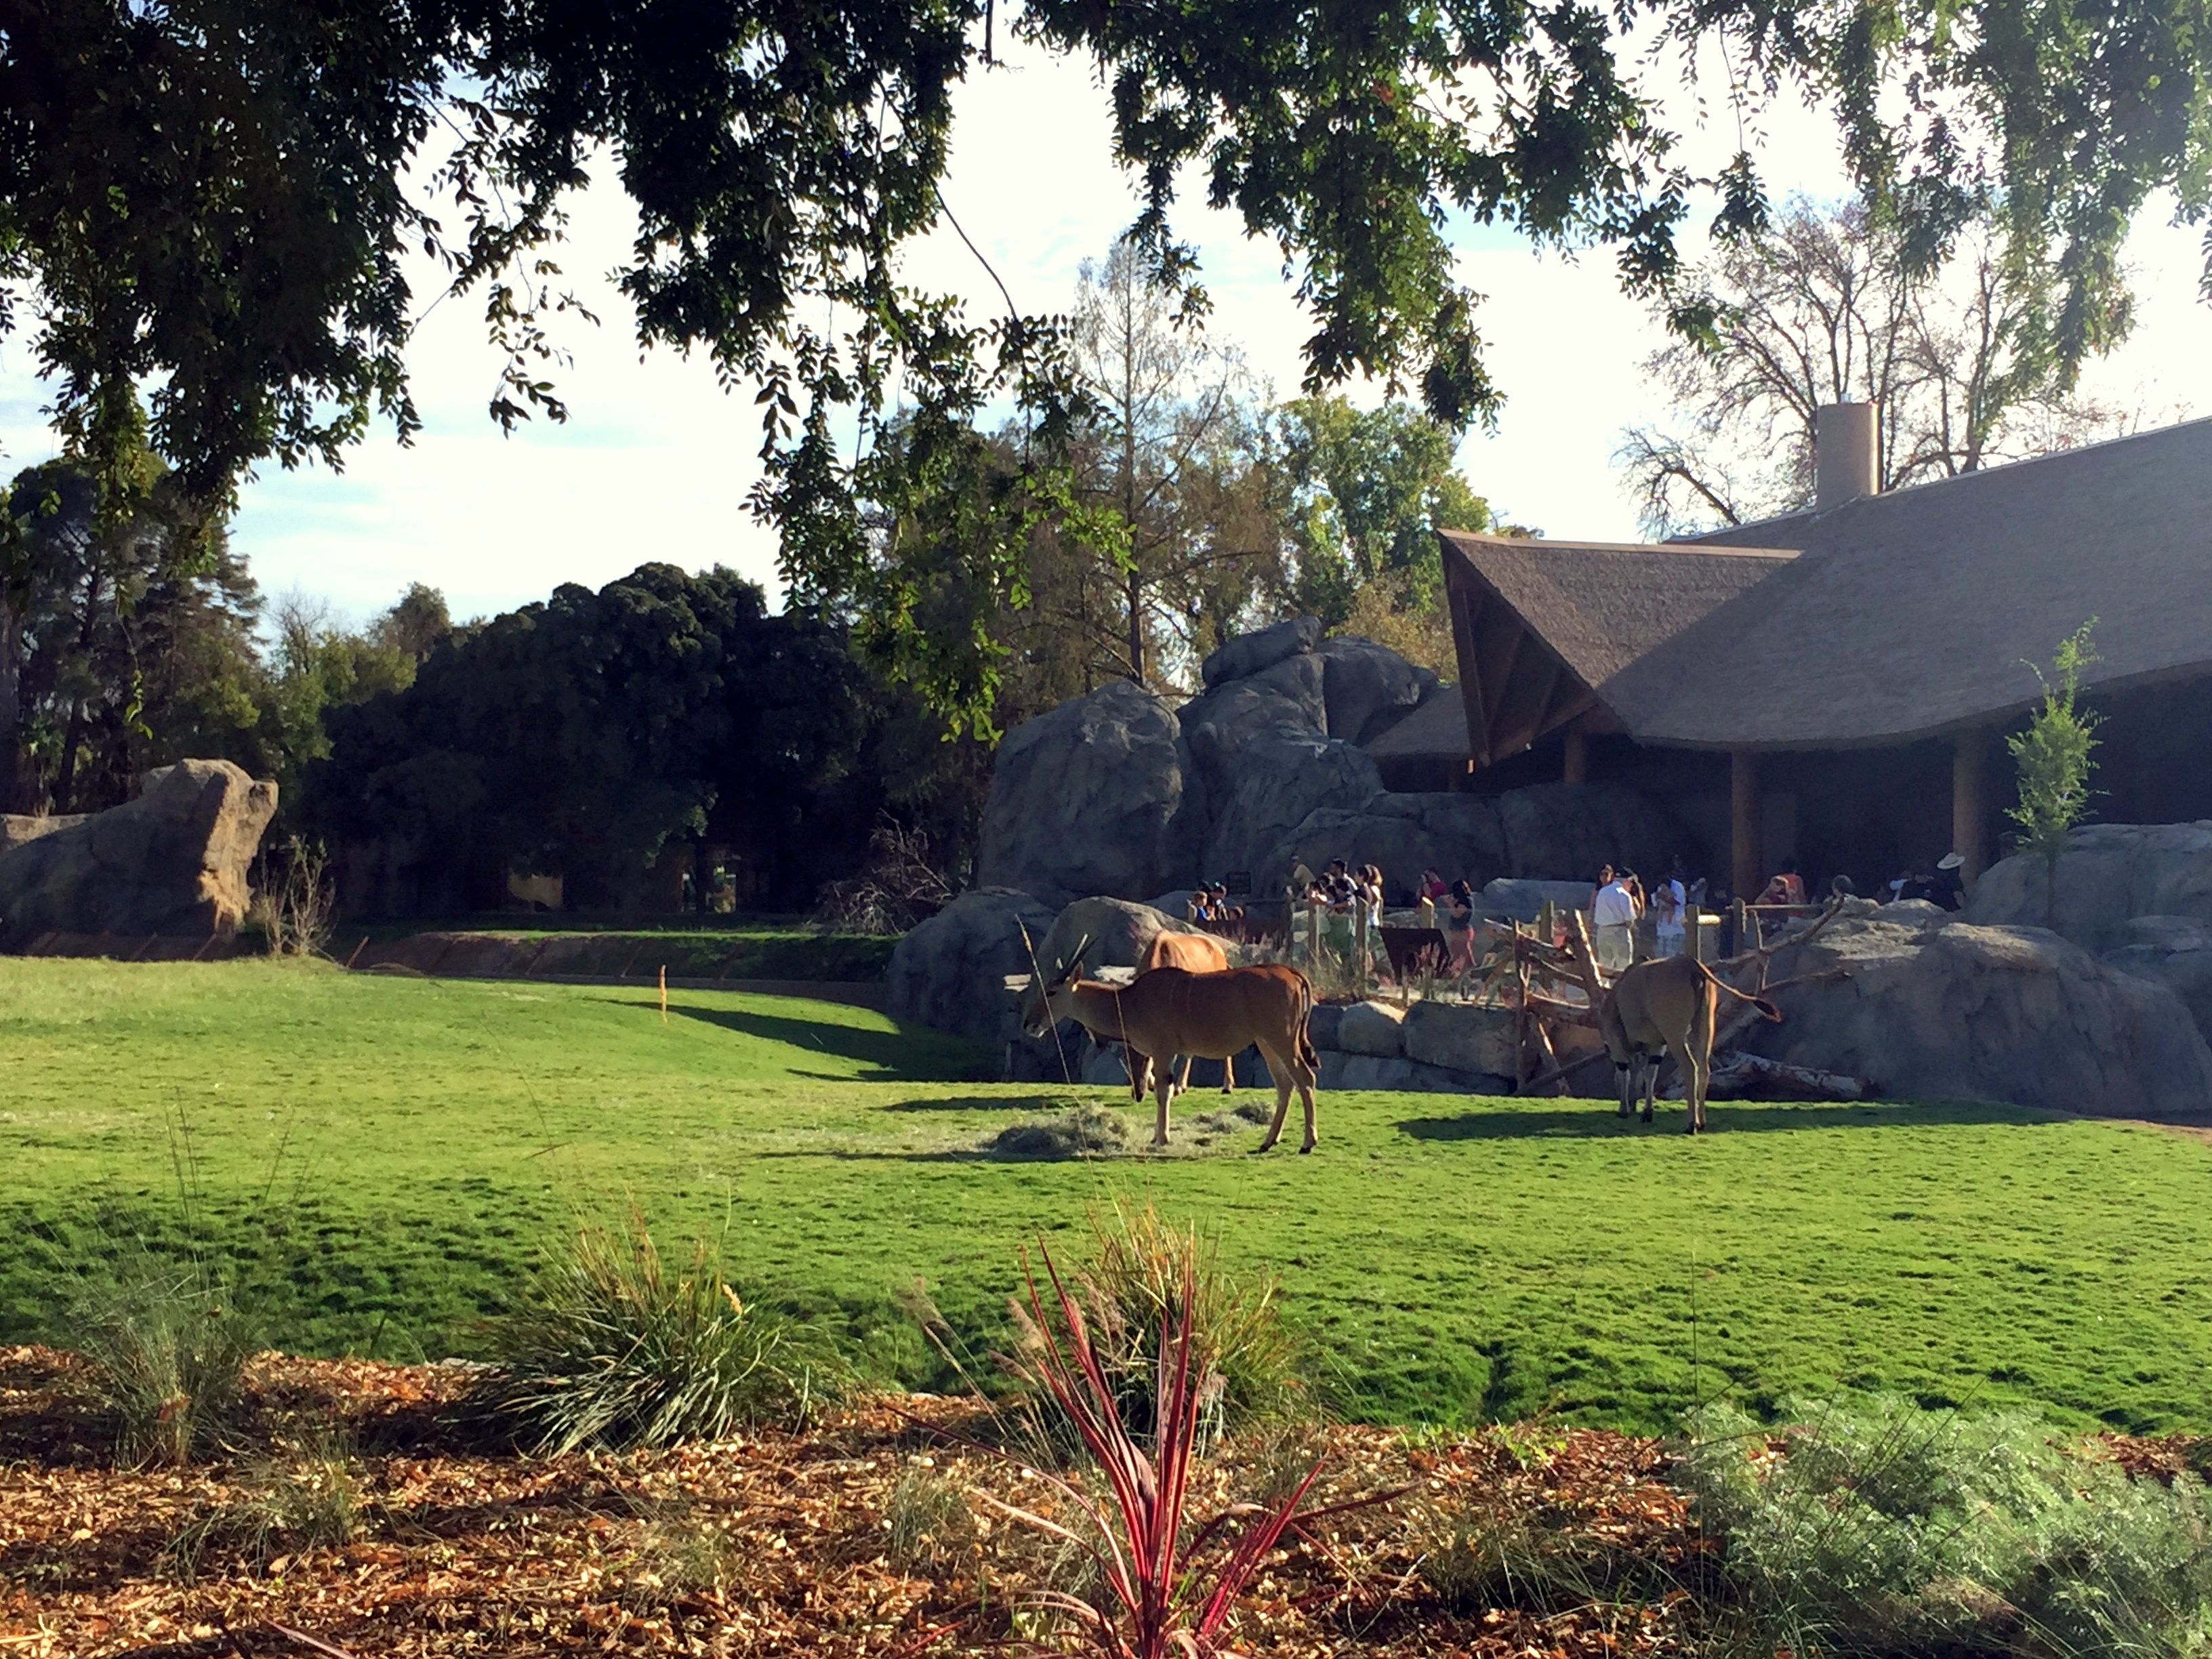 The dining area overlooks the animals